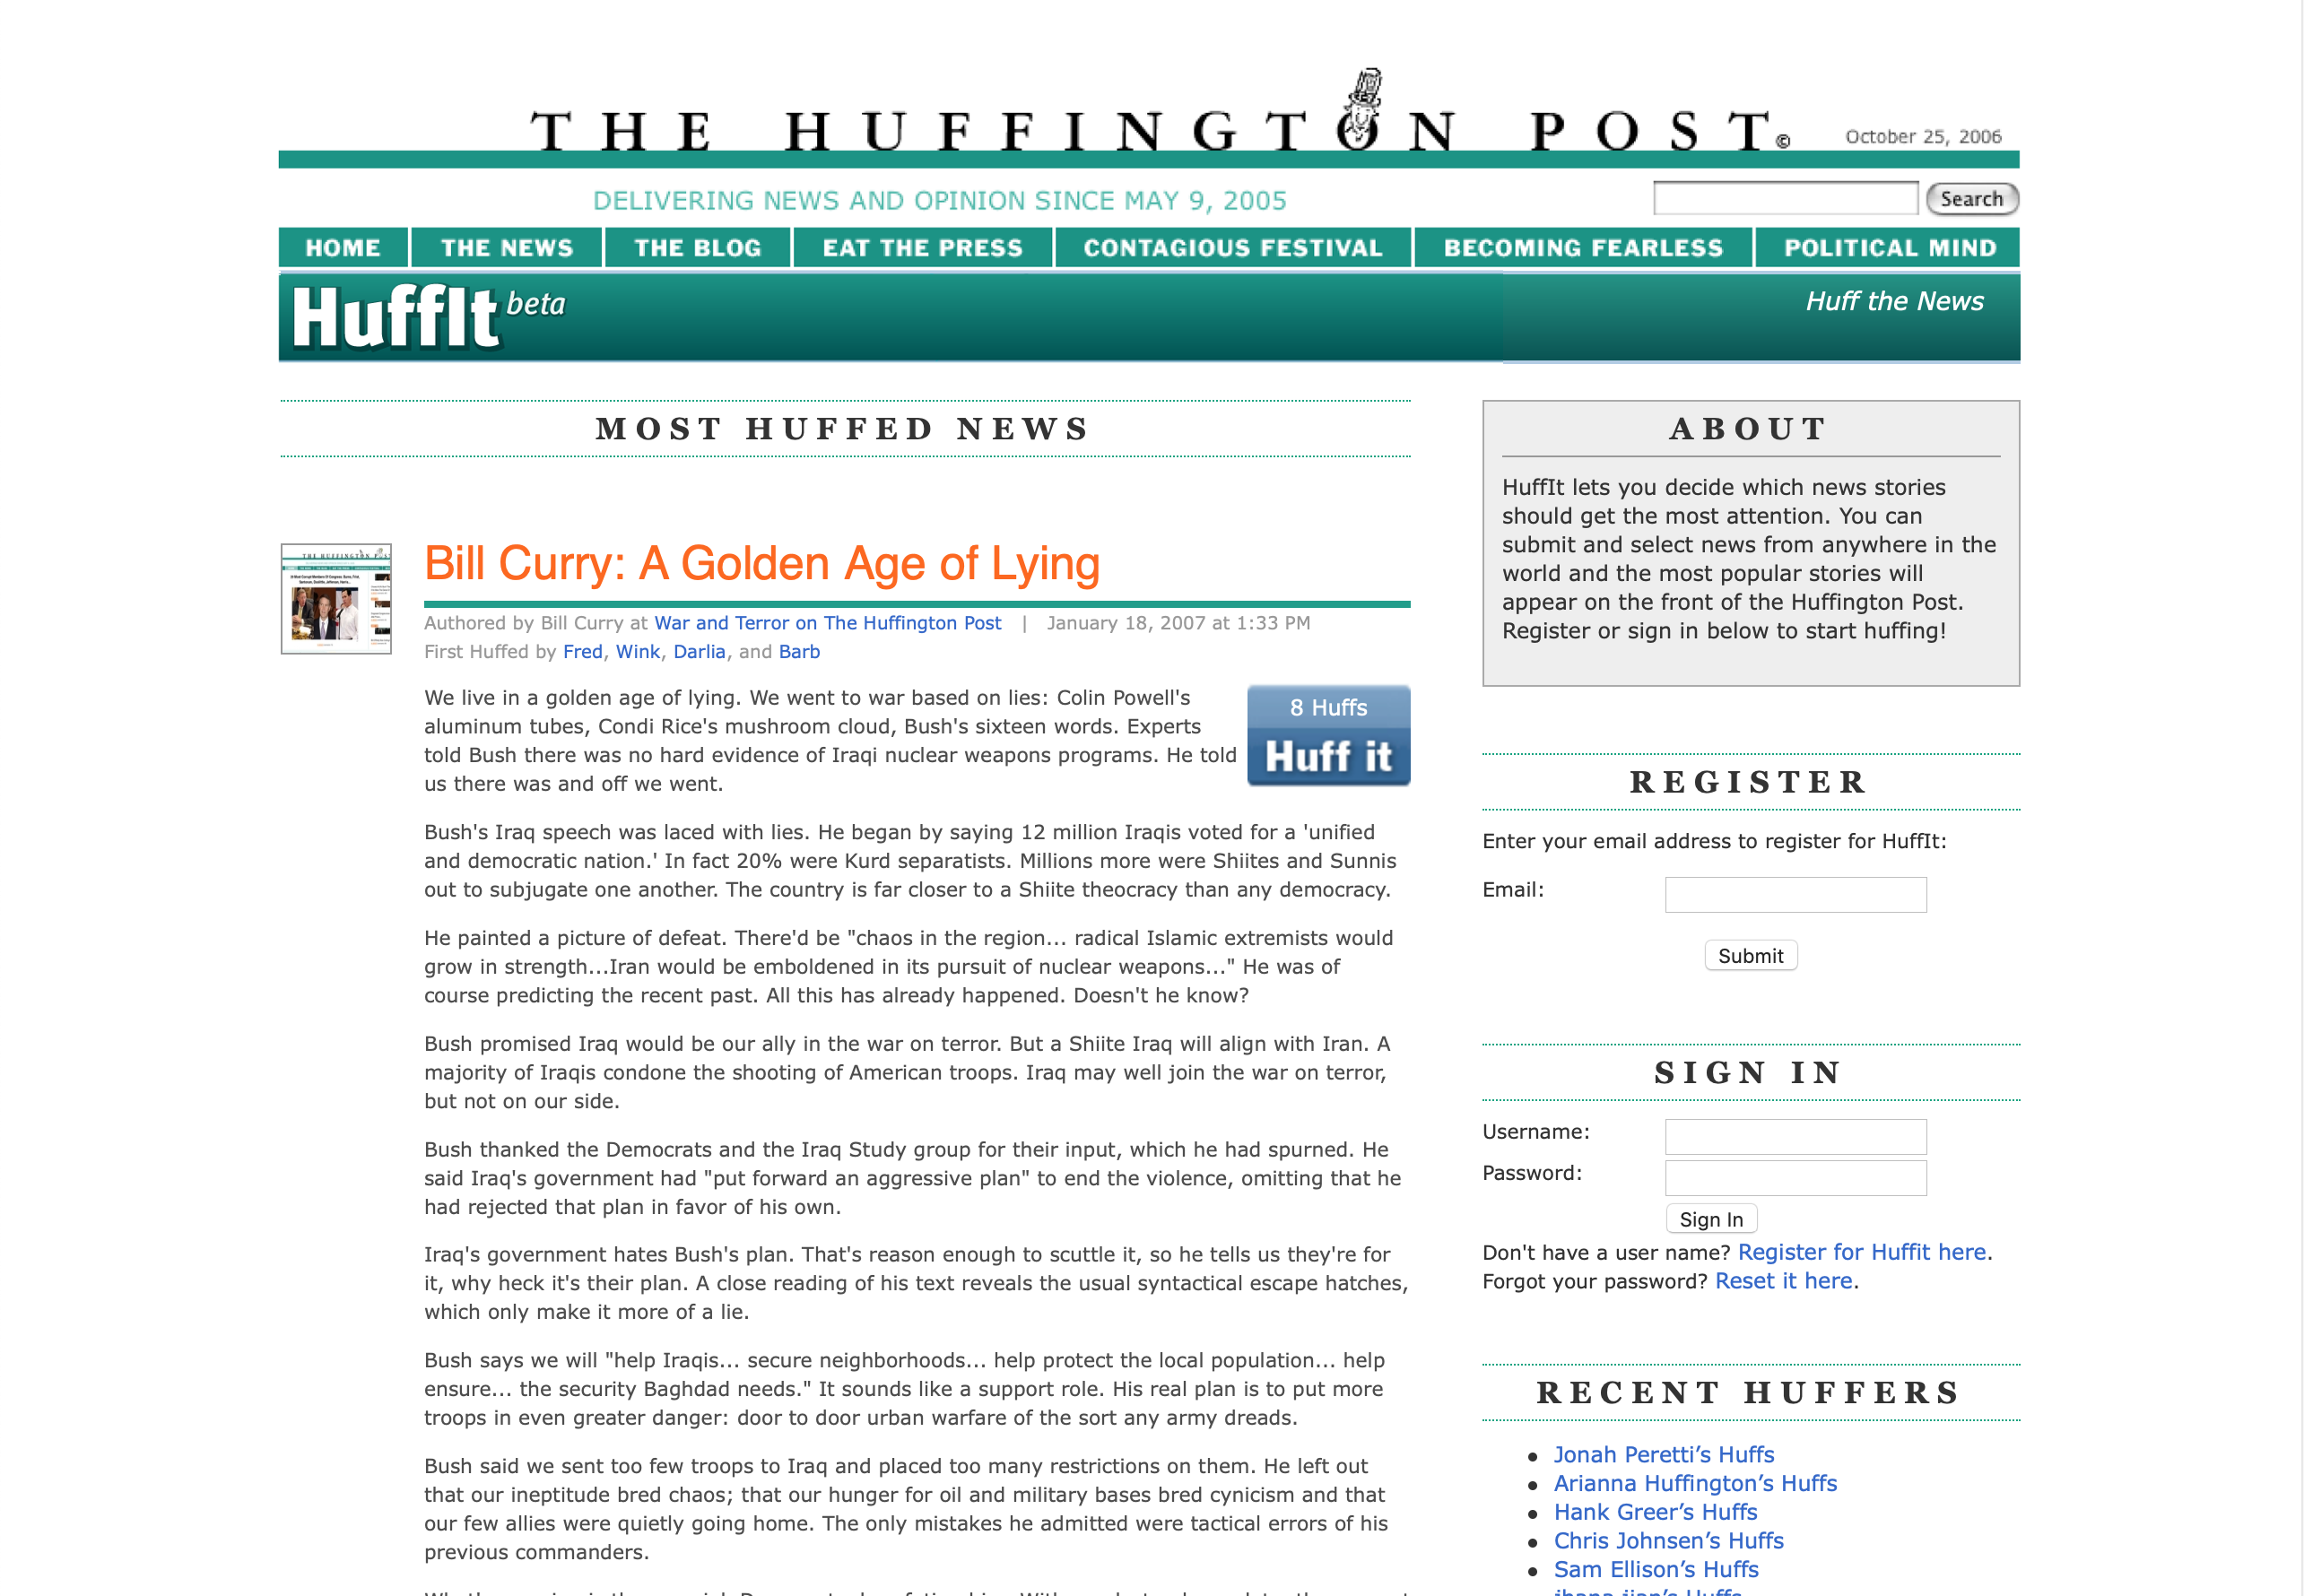 HuffIt Public View